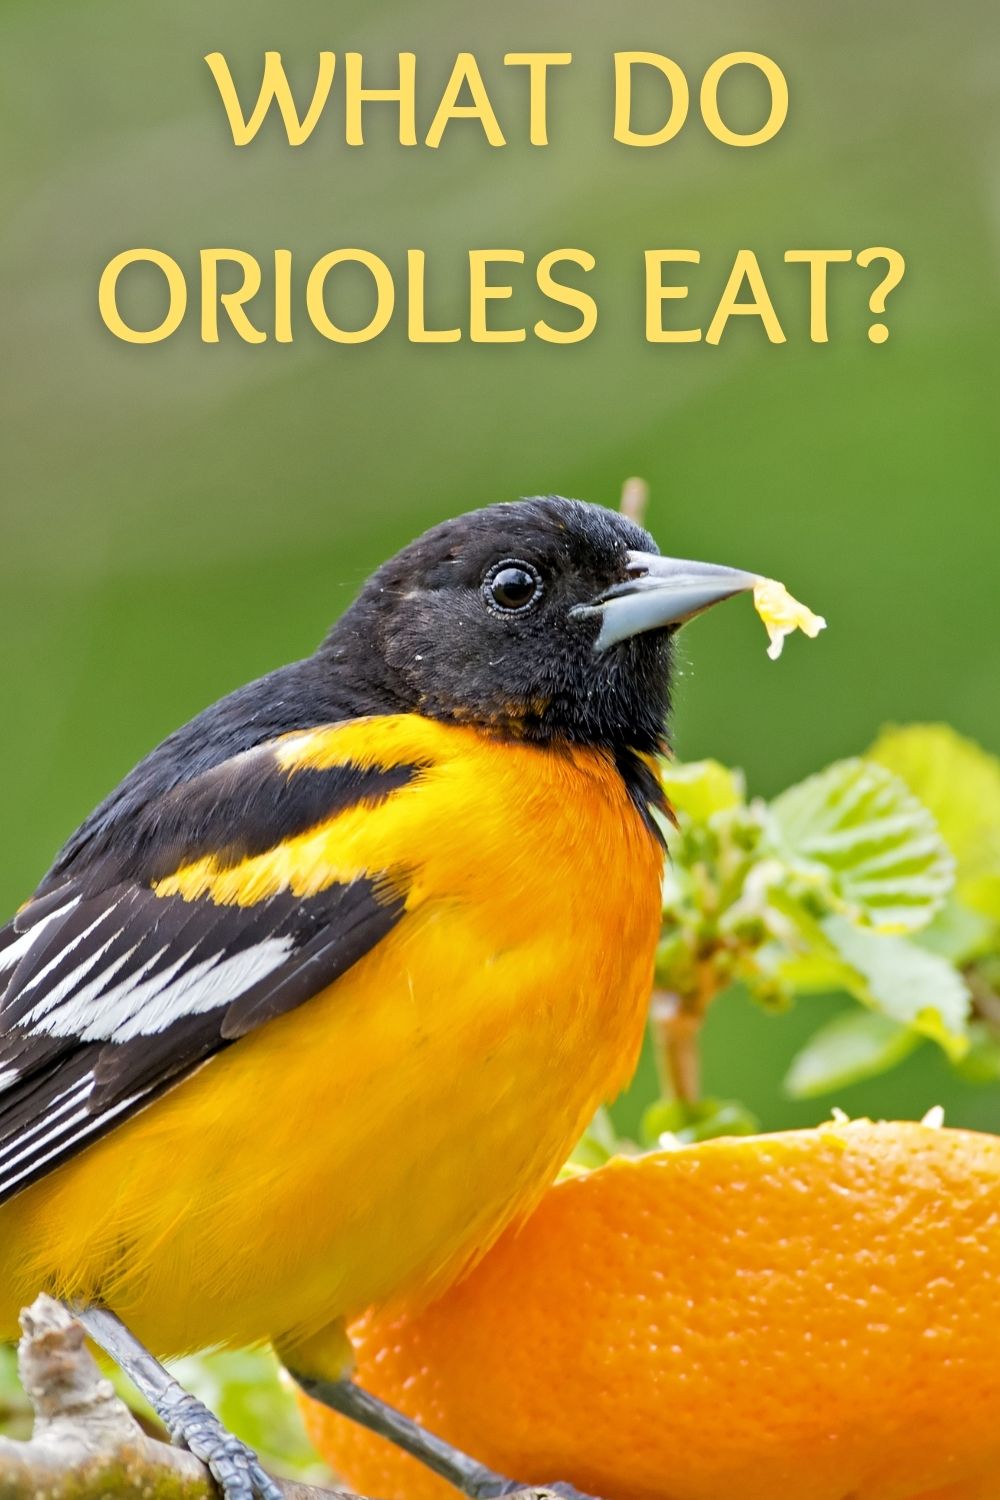 what do orioles eat?